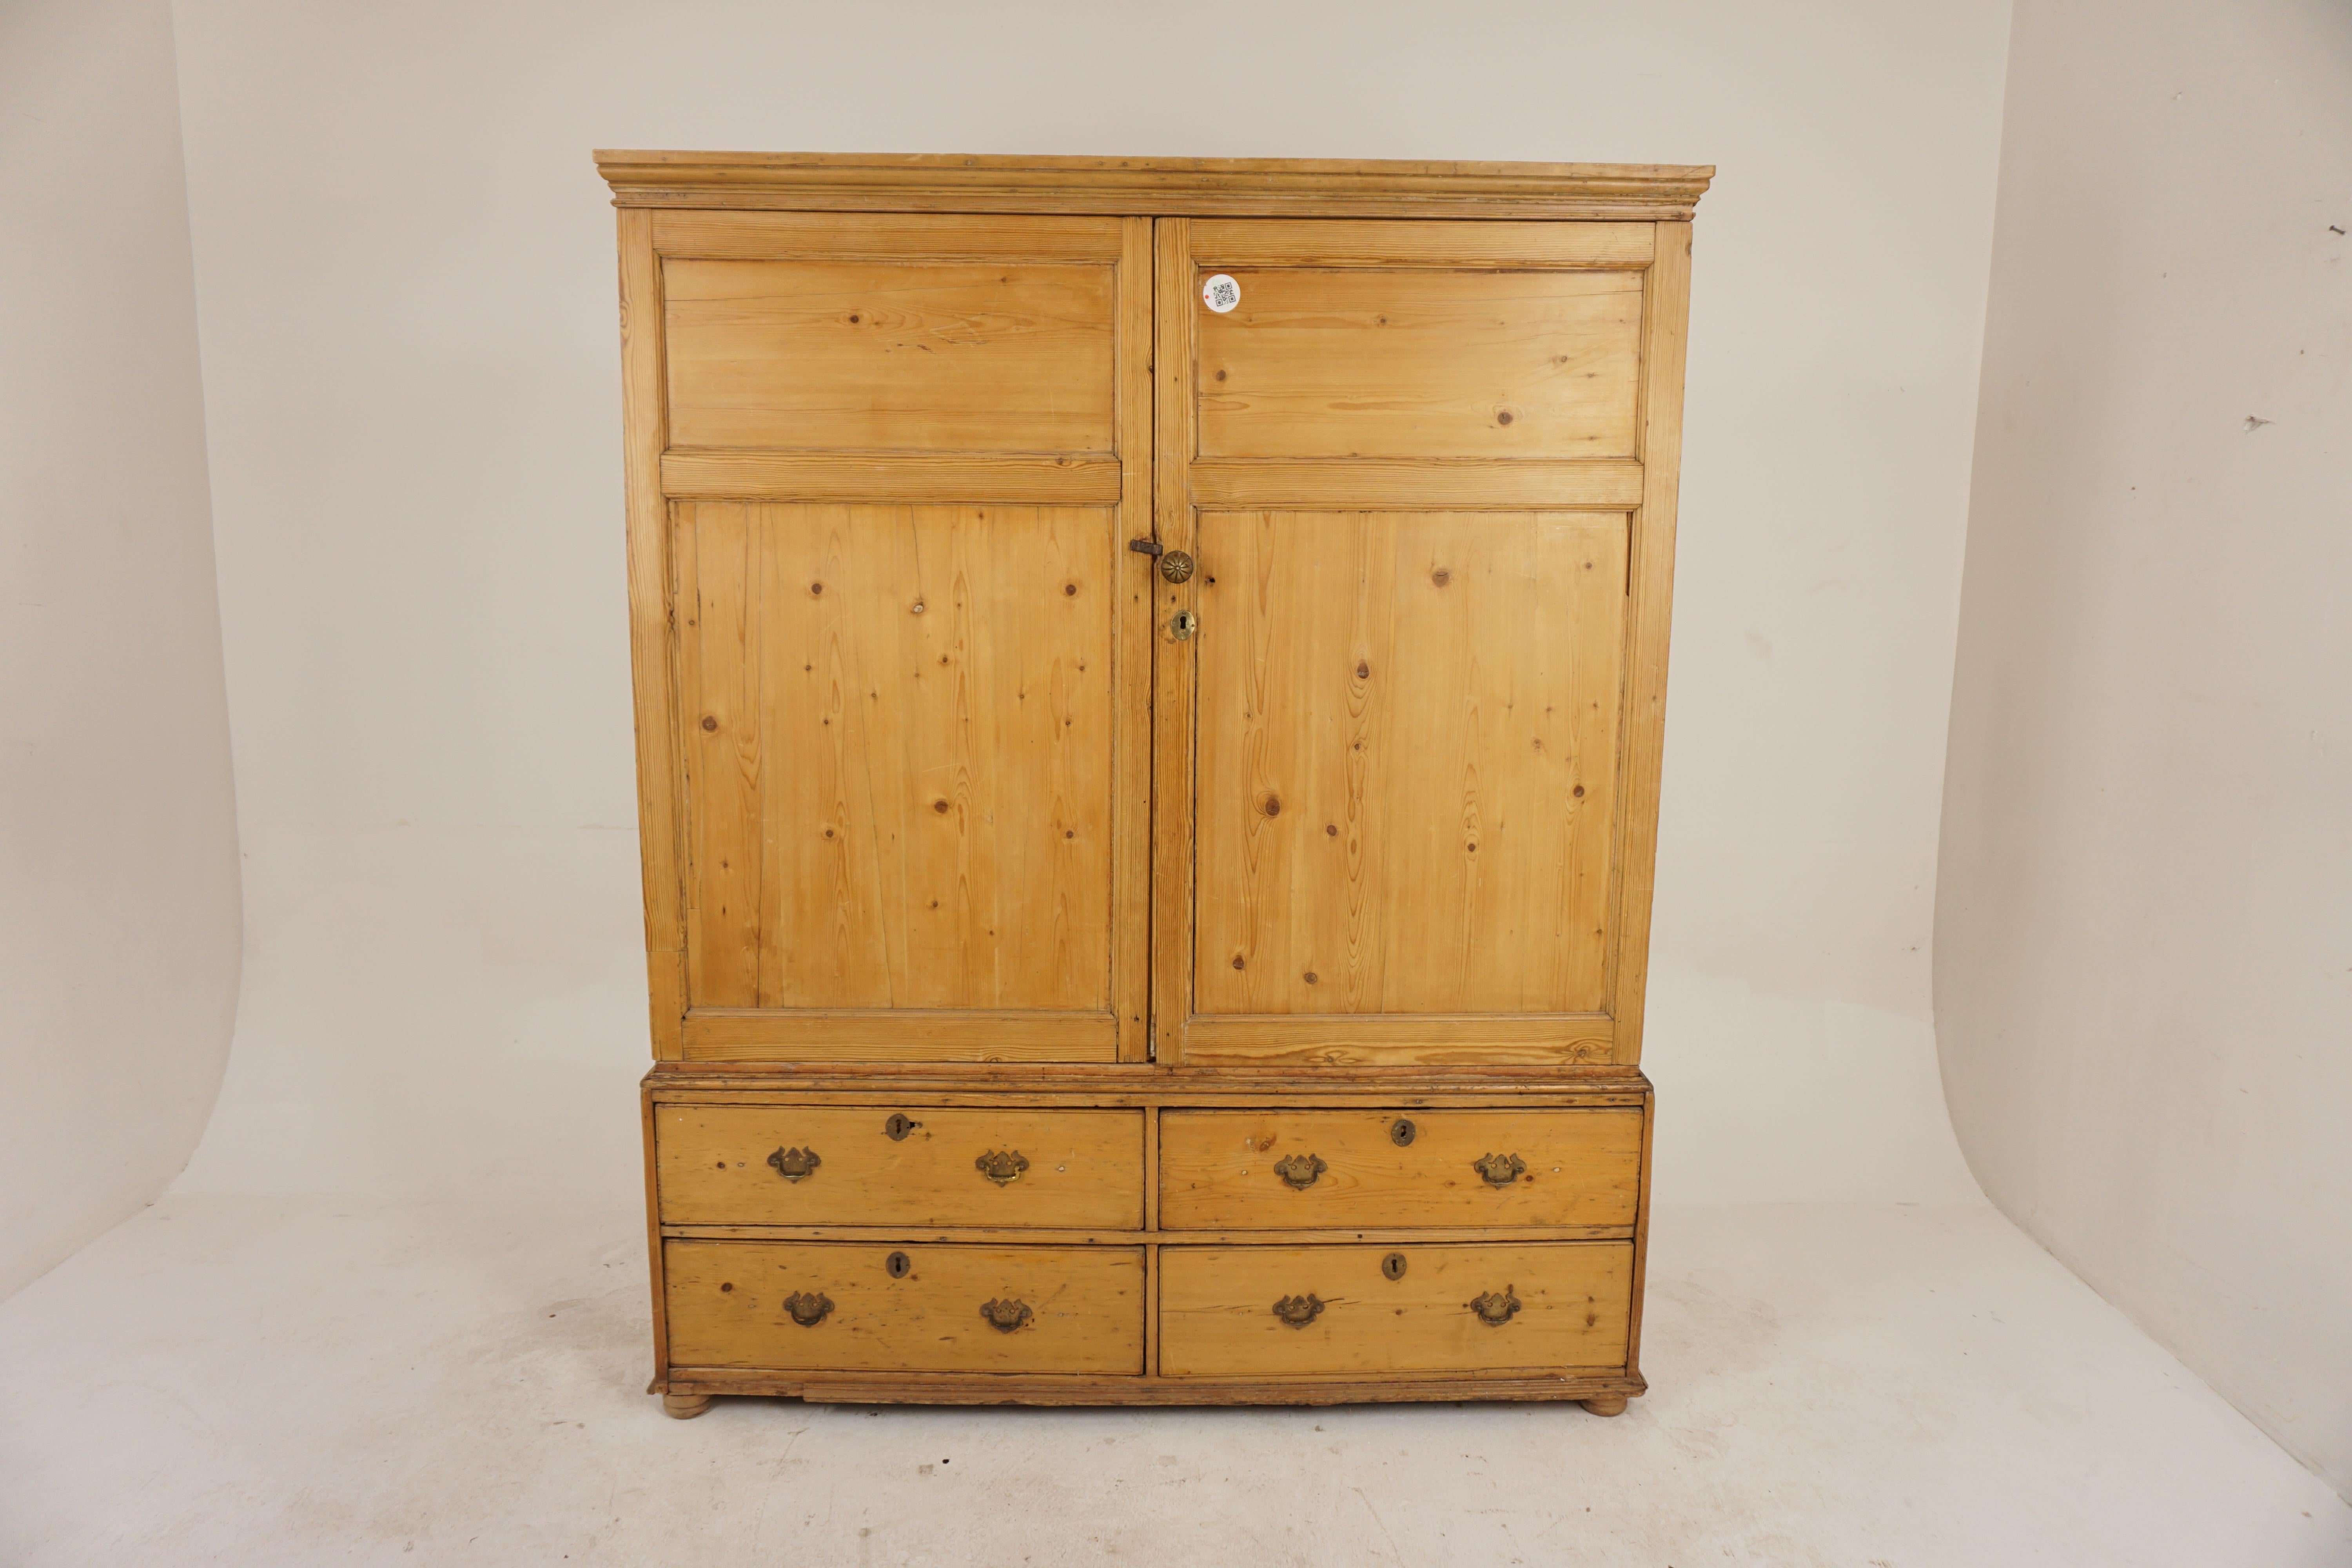 Antique Victorian Farmhouse Housekeeper Cabinet, Cupboard, Scotland 1870, H693

Scotland 1870
Solid Pine
Original Finish
With moulded cornice
Large cupboard section to the top with two panelled doors that open to reveal two replica shelves
Room for